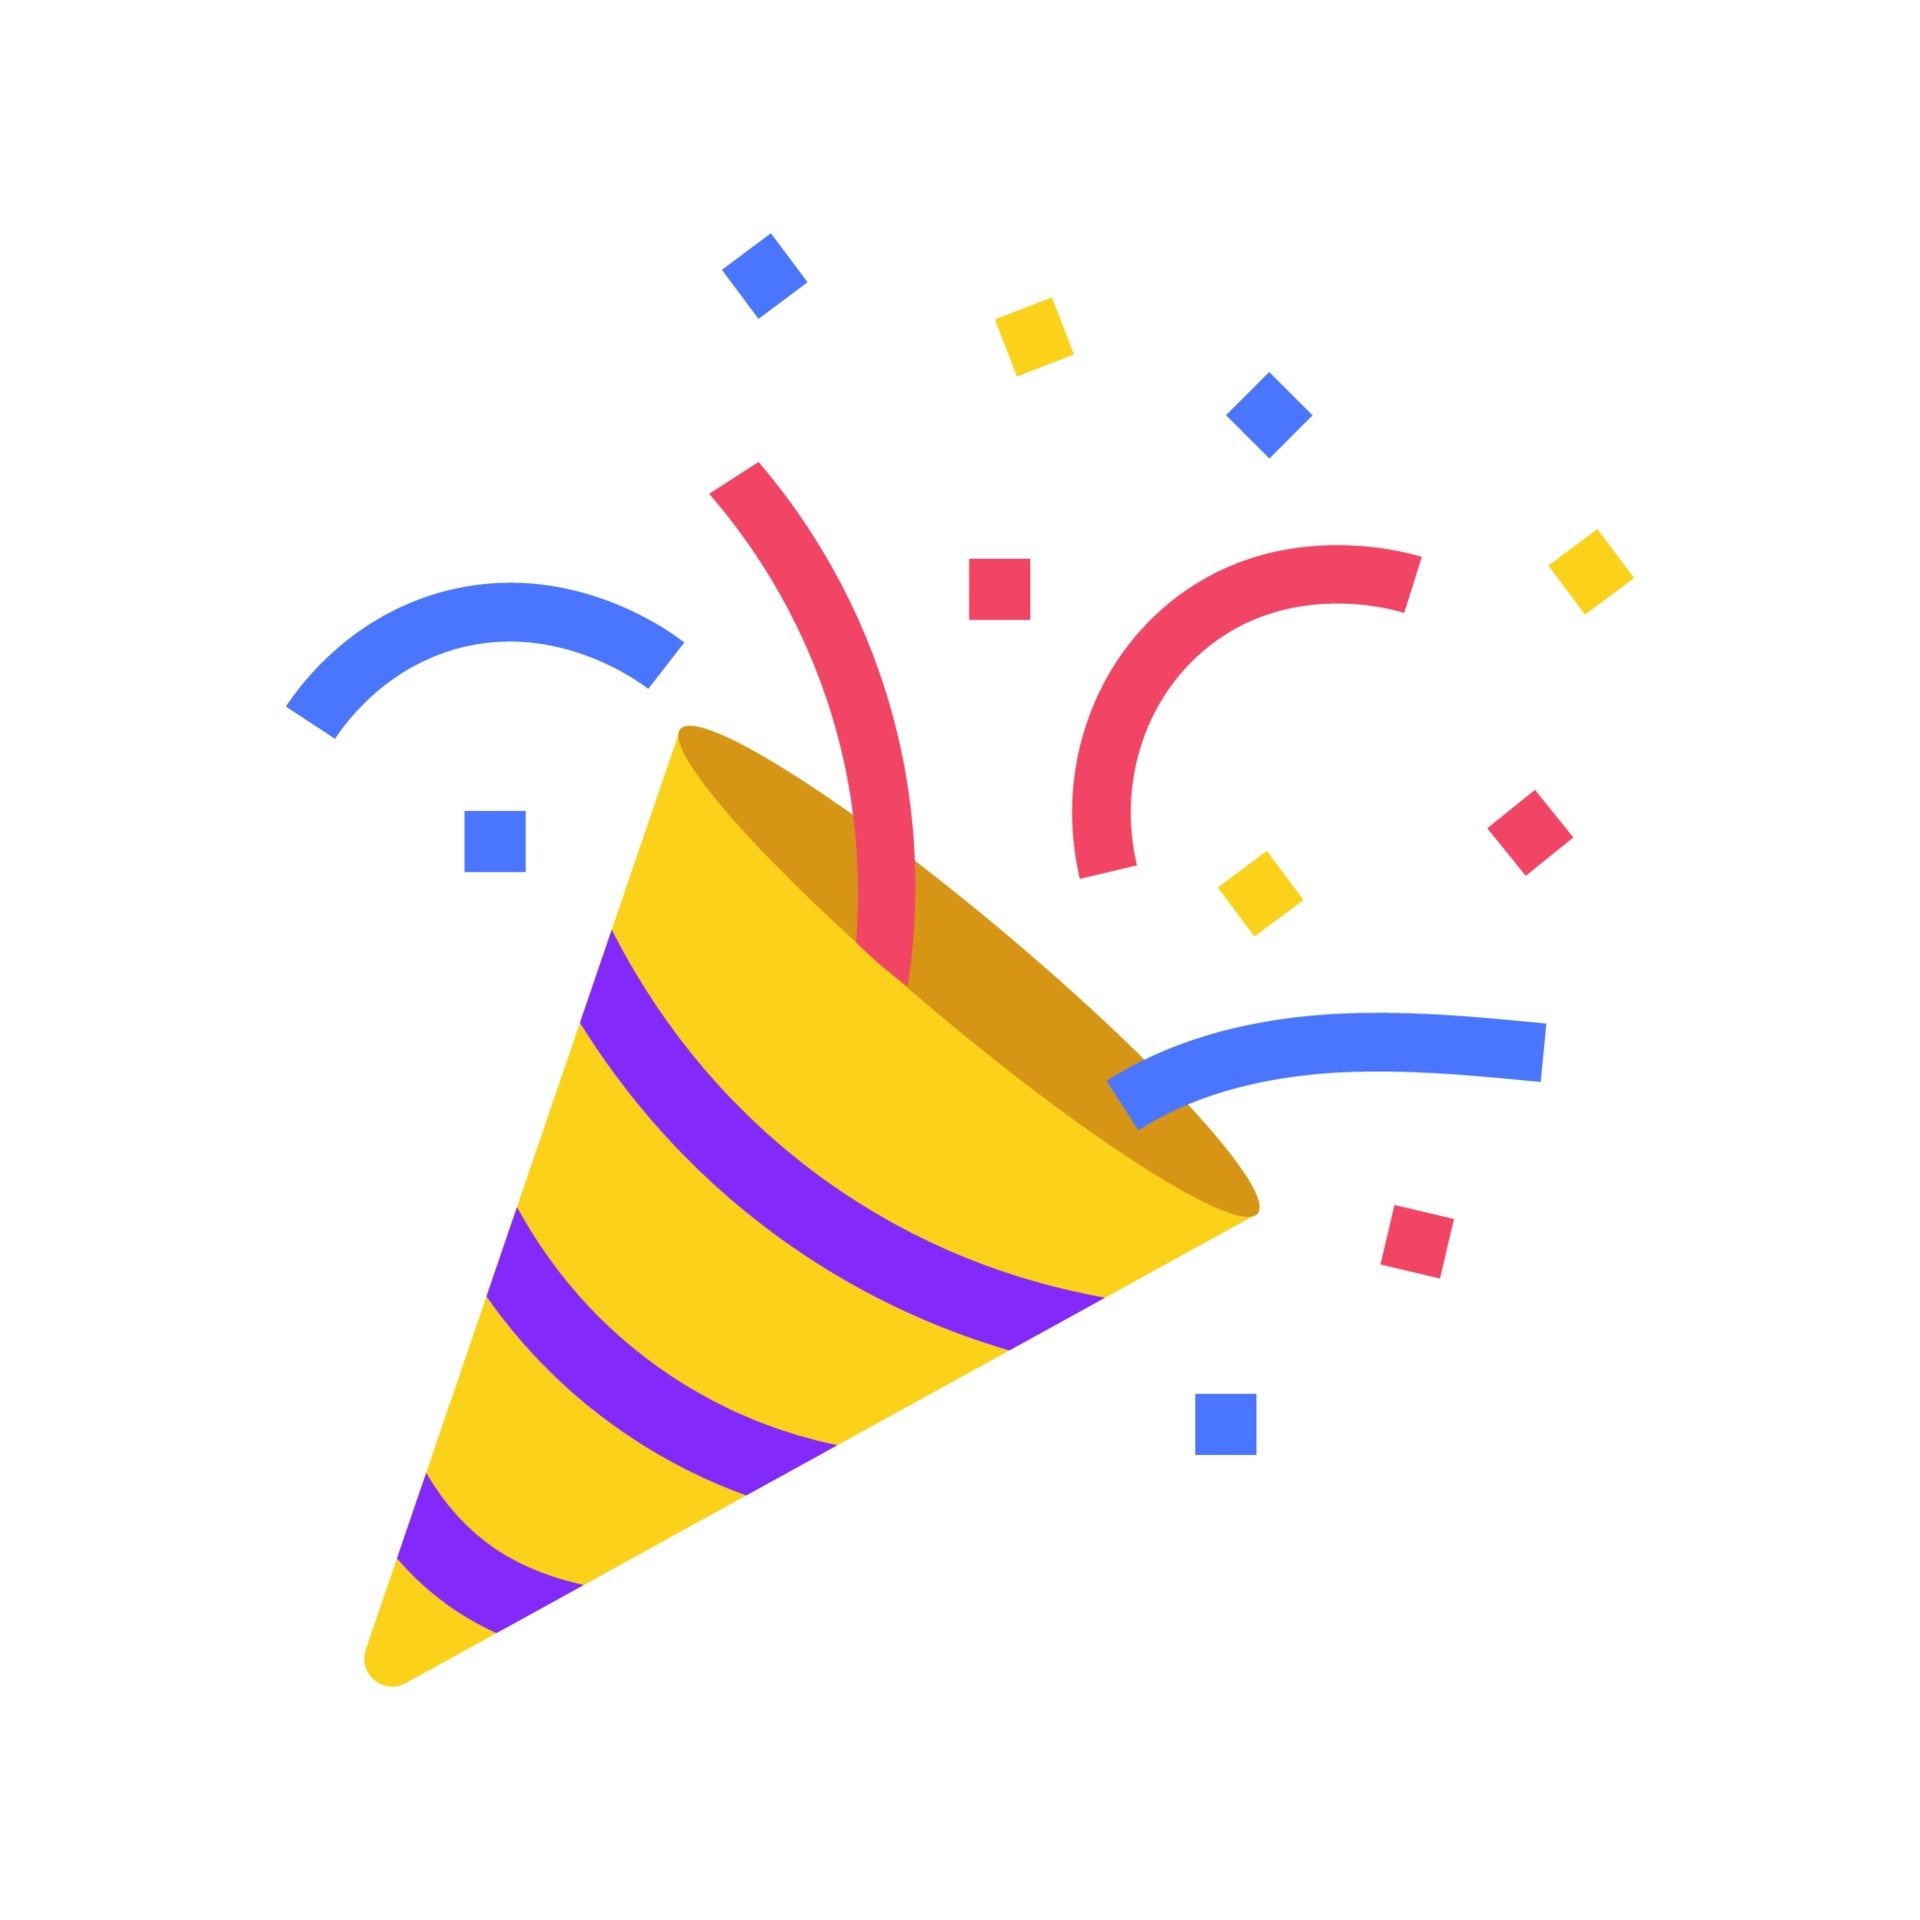 icon-emoji-party-confetti-in-clubhouse-social-network-happy-birthday-cracker-isolated-icon-illustration-vector.jpeg